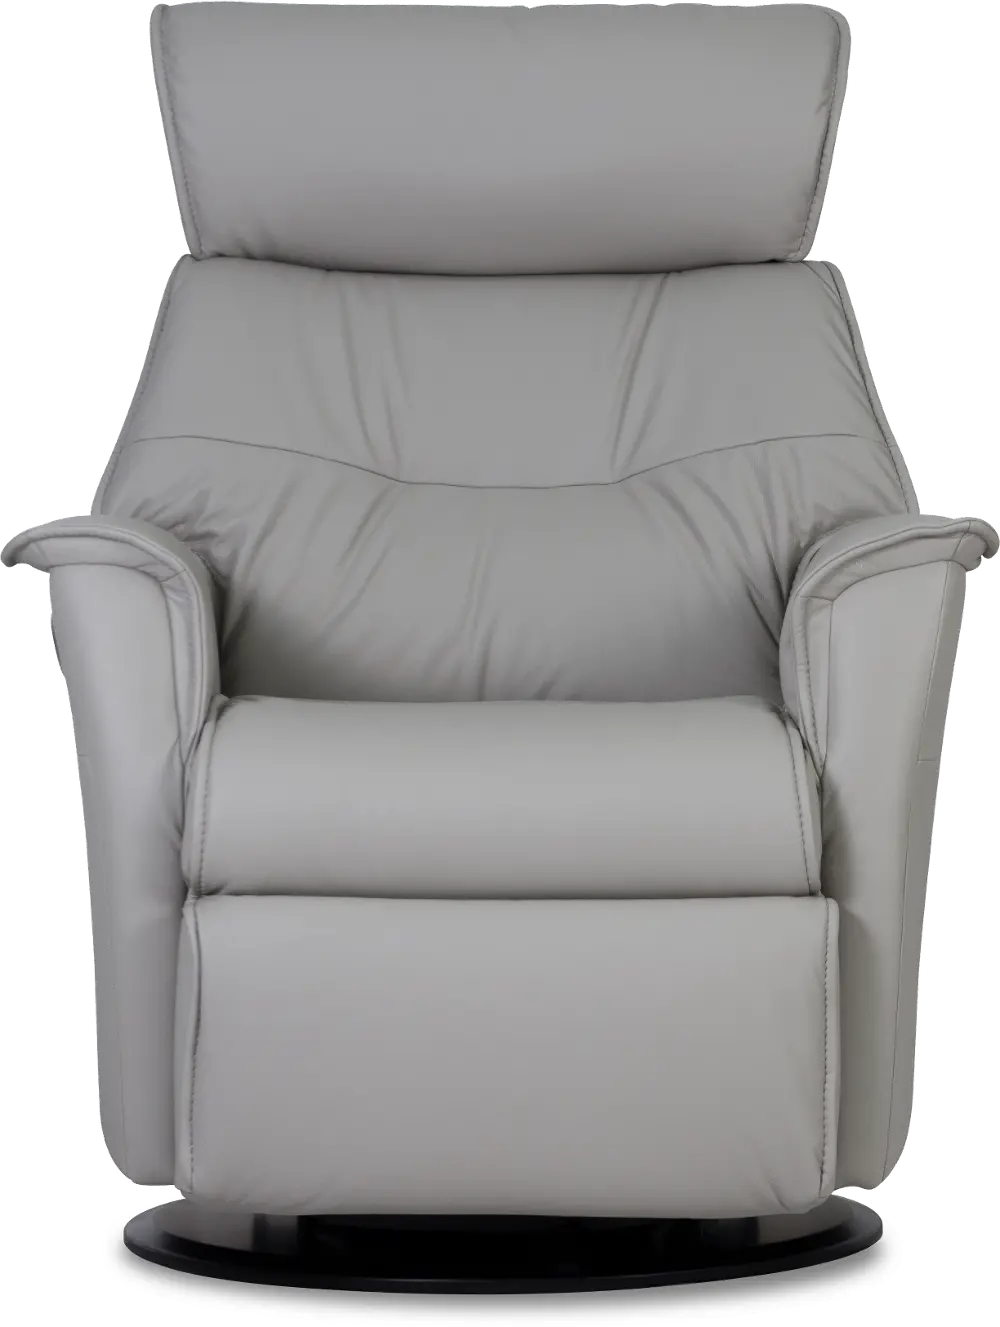 Cinder Taupe Standard Leather Swivel Glider Power Recliner - Captain-1